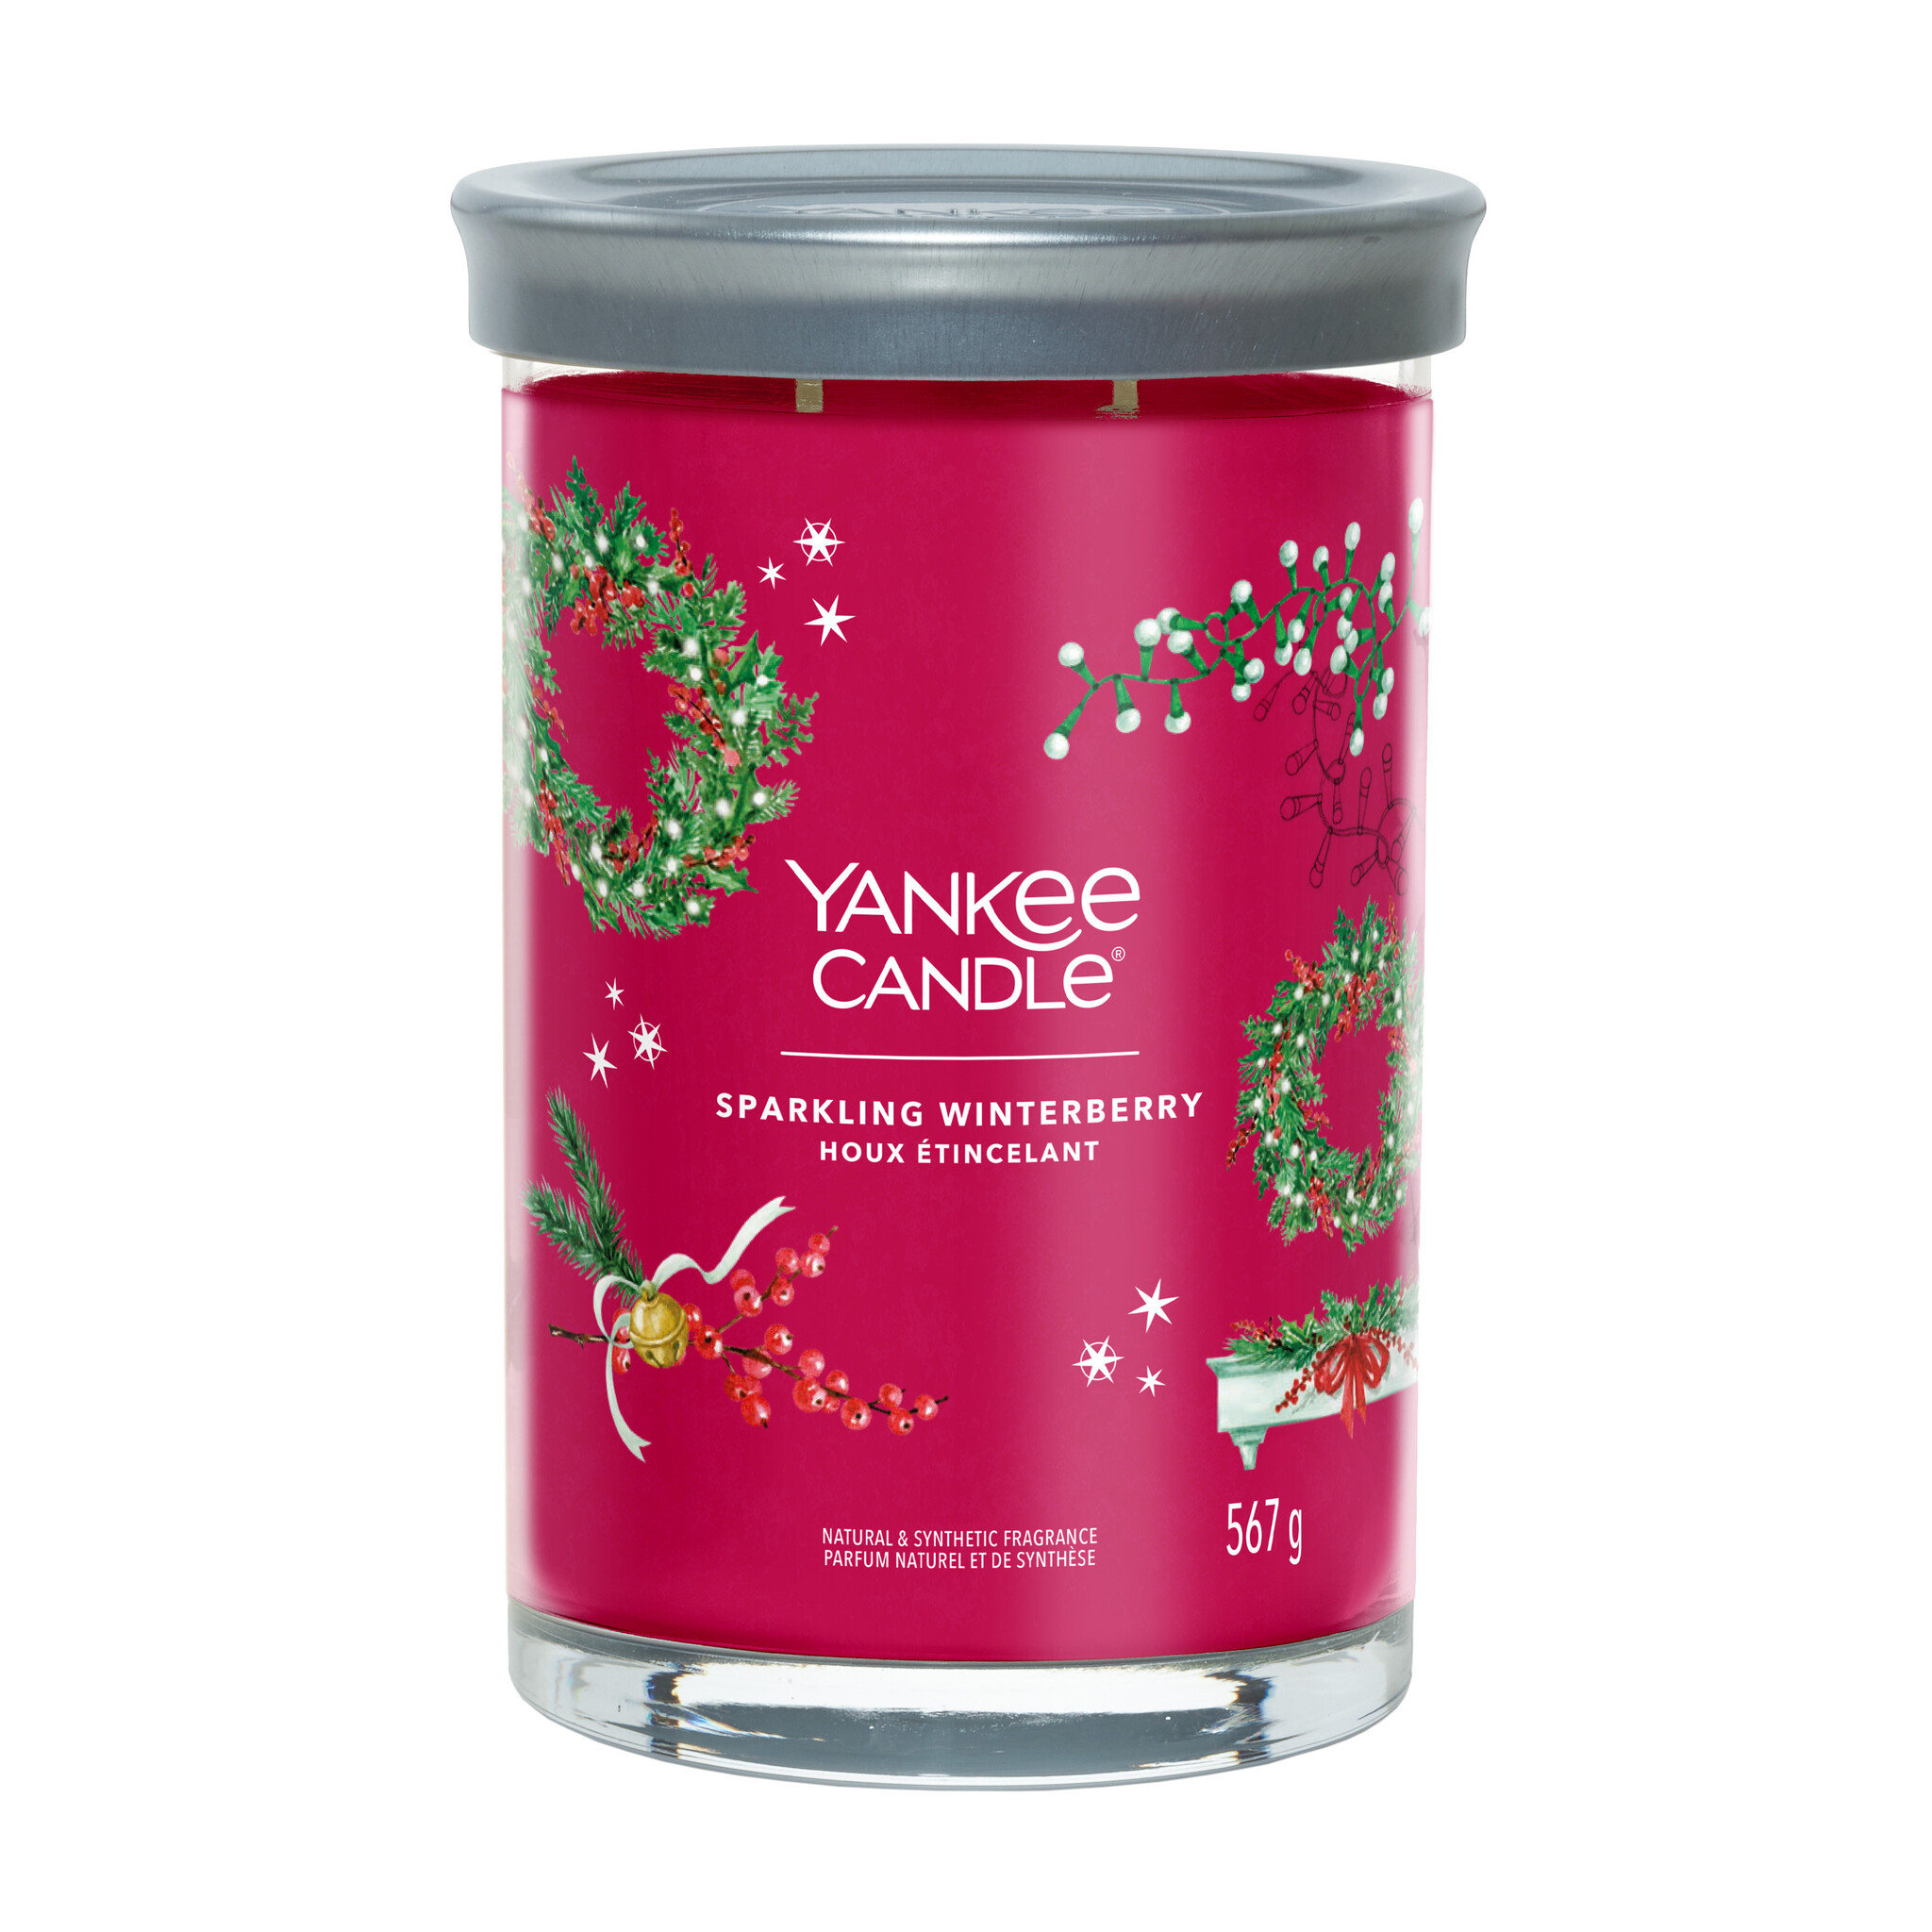 Yankee Candle - Sparkling Winterberry Large Tumbler